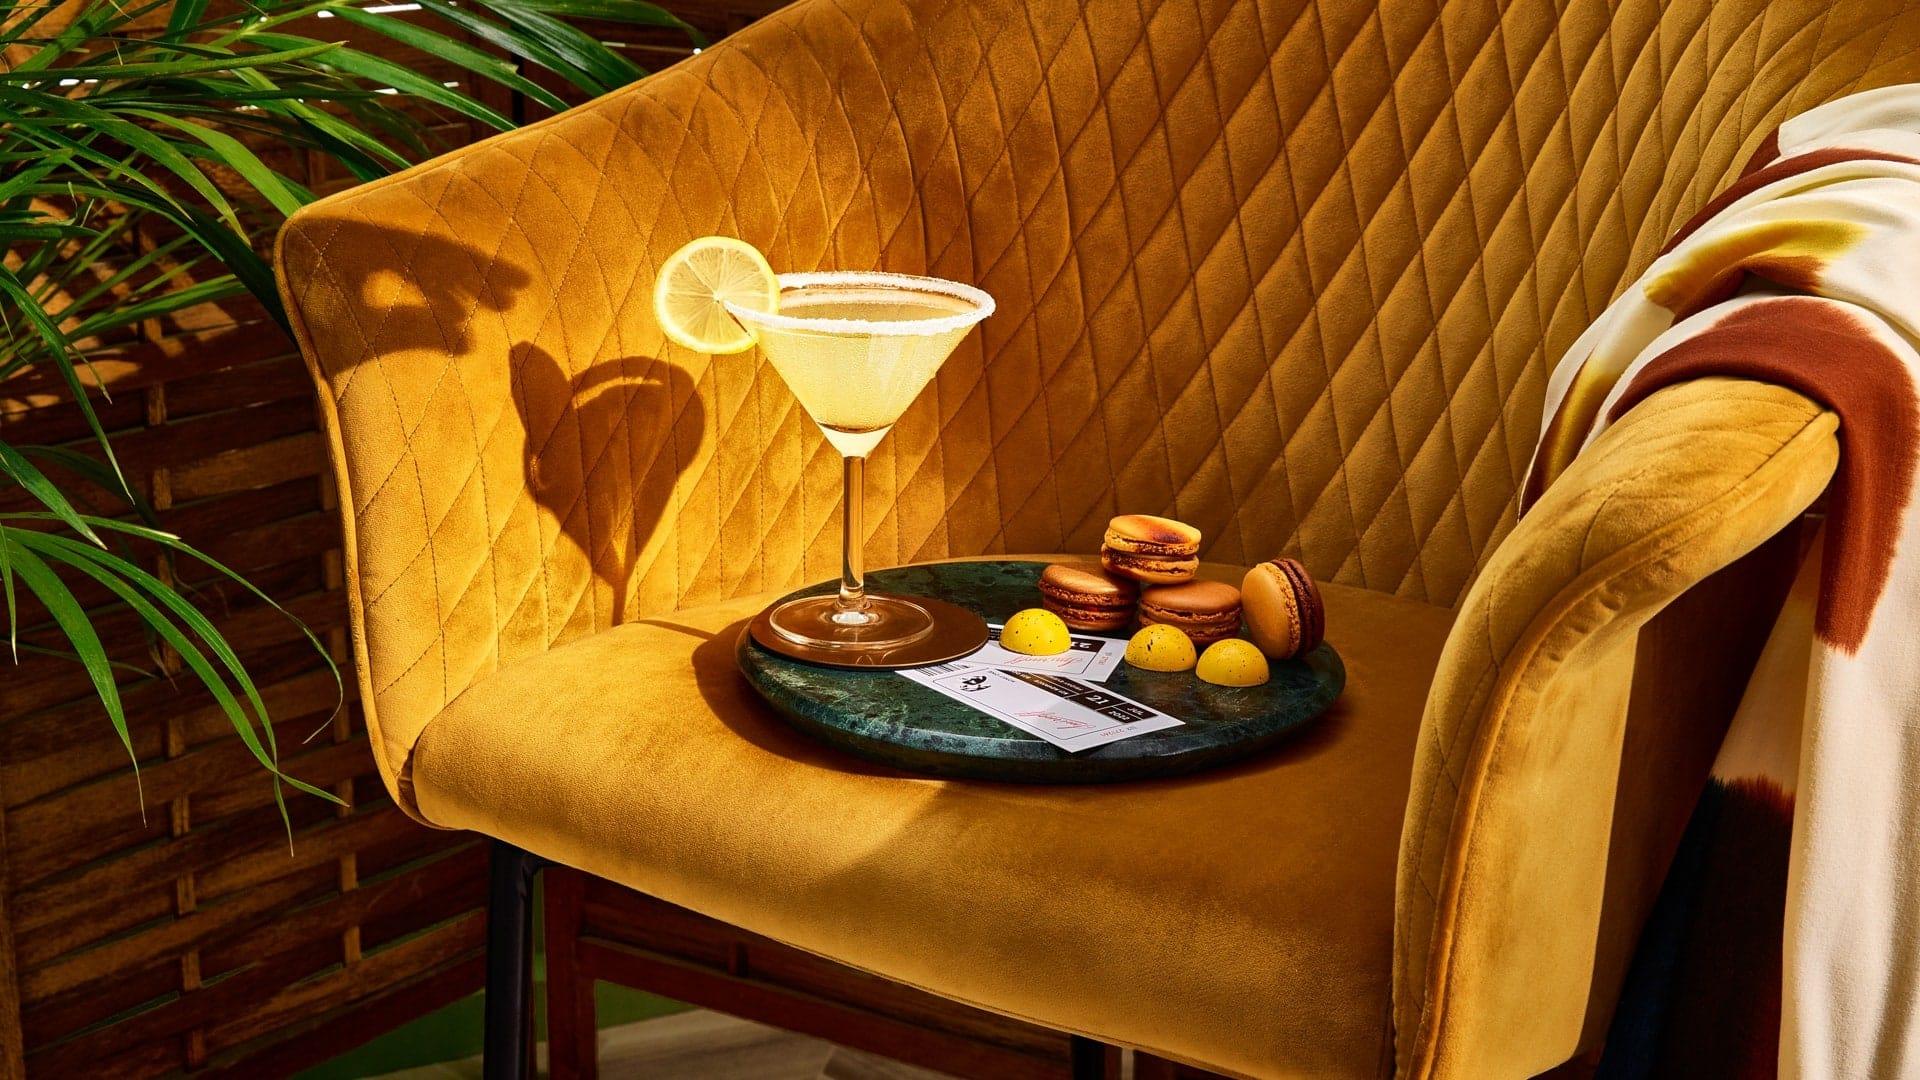 A lemondrop martini on a chair with a hand shadow coming in